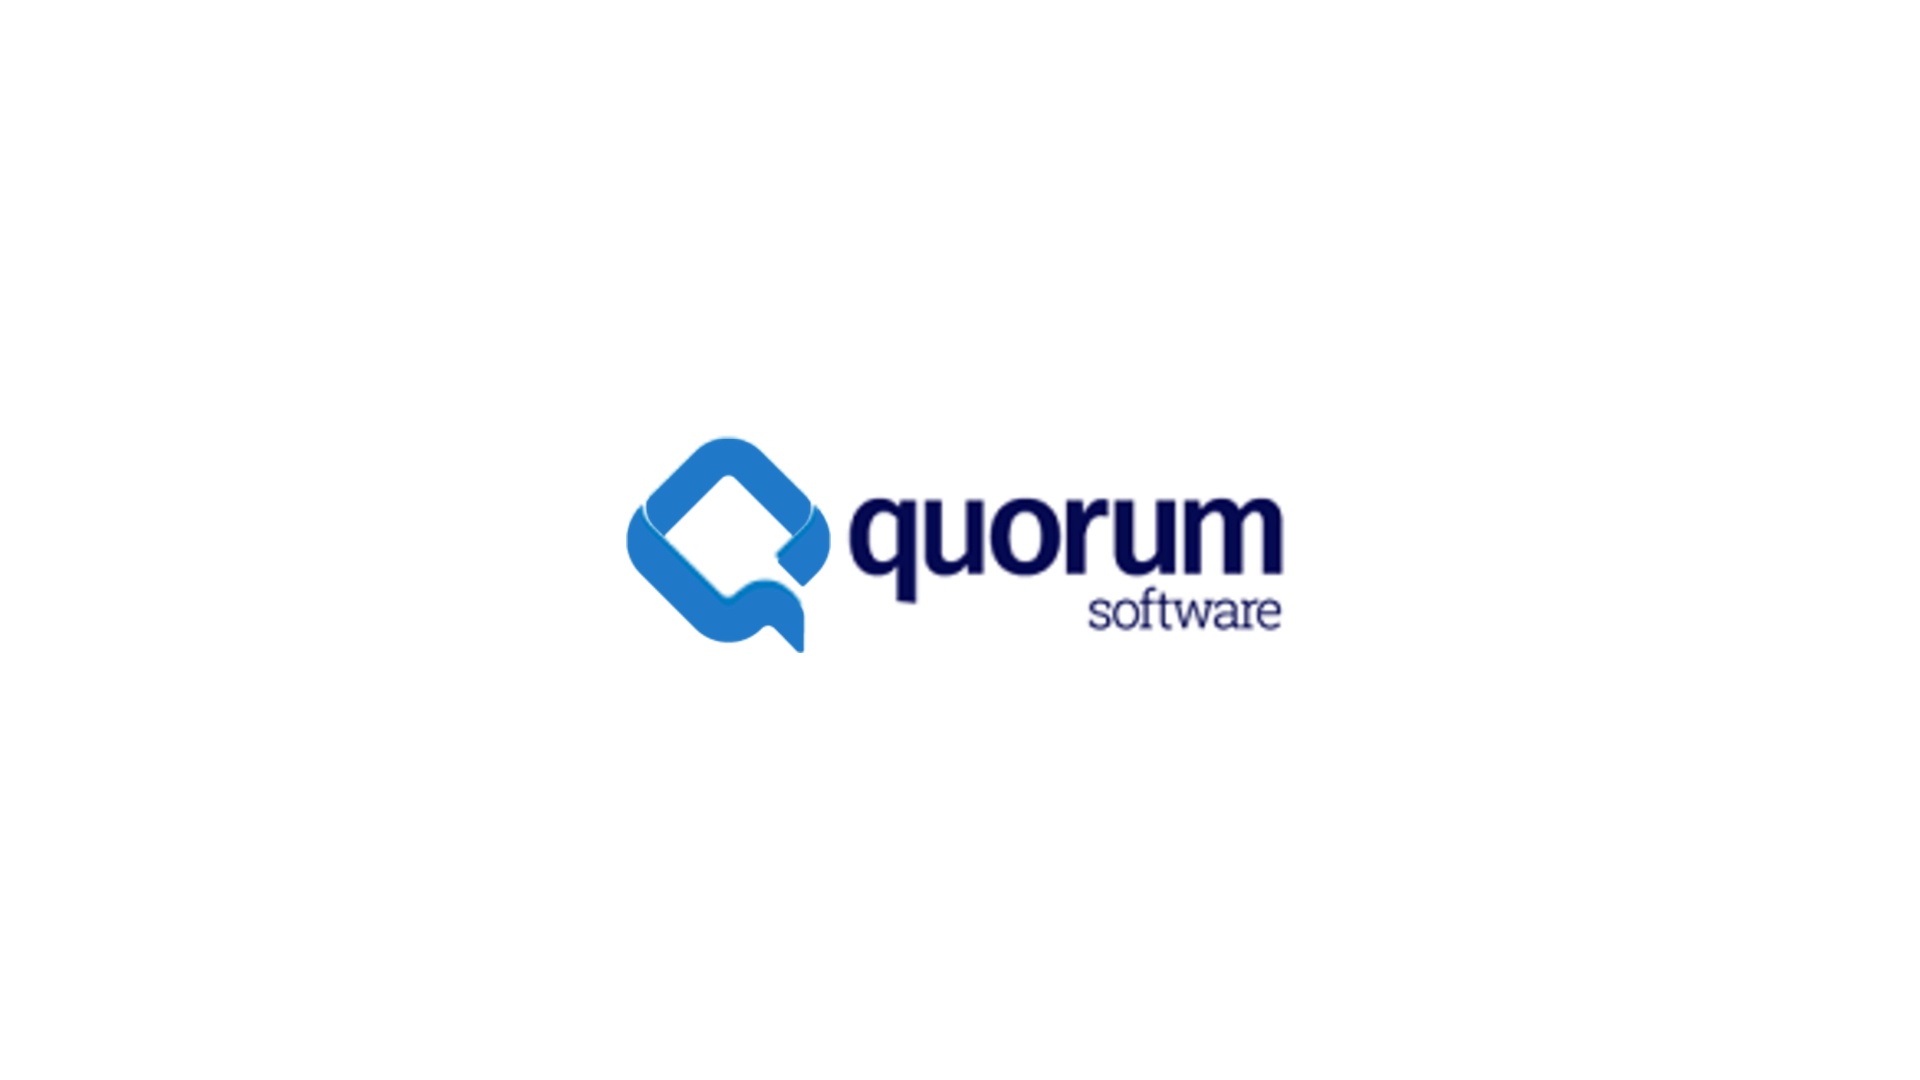 Utah Gas Corp Implements FLOWCAL by Quorum Software to Improve Data Accuracy and Streamline Acquisition Integration